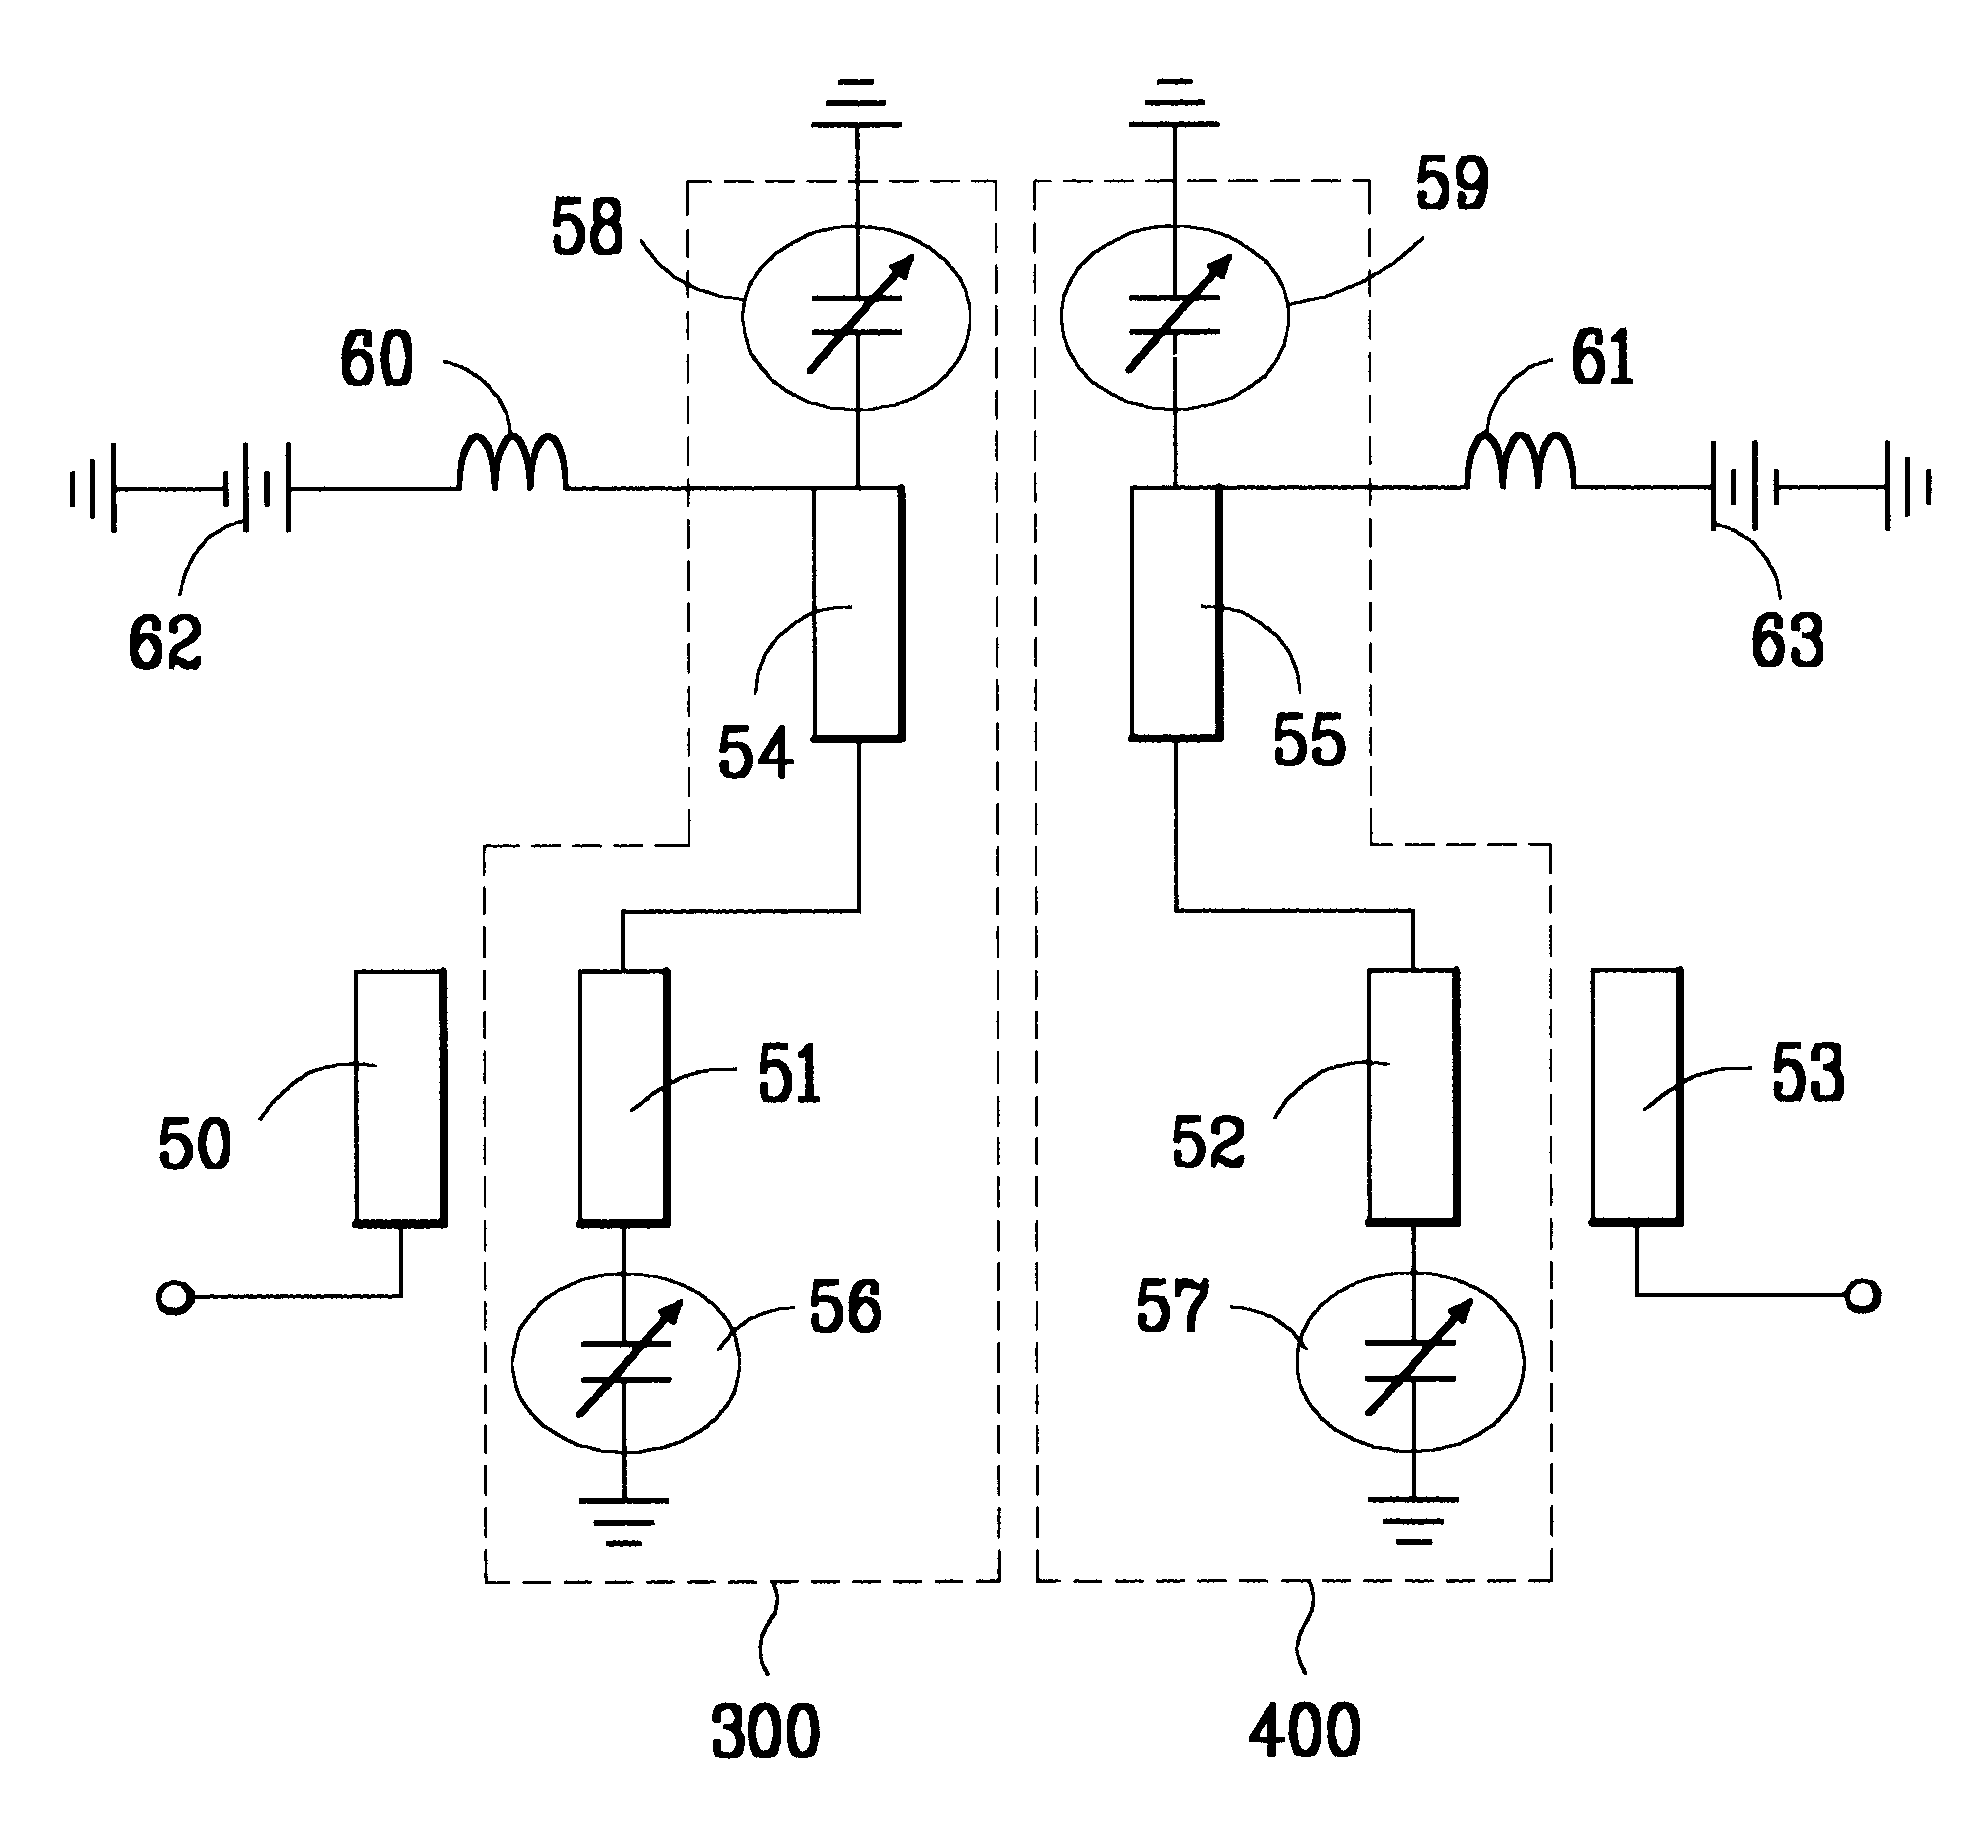 Microwave tunable filter using microelectromechanical (MEMS) system